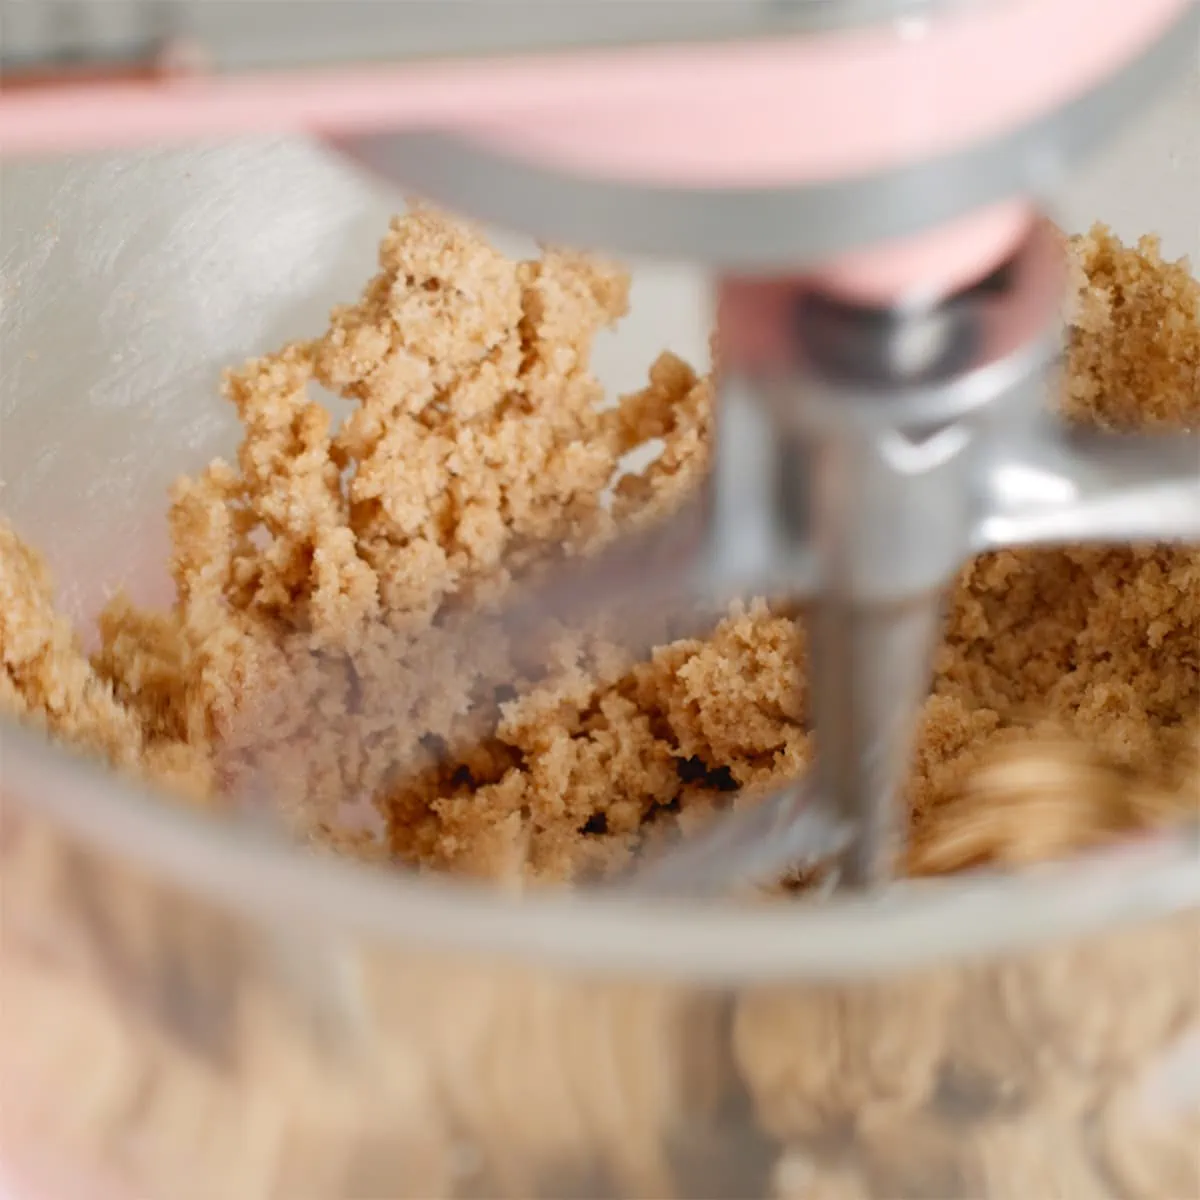 Butter and sugars being whipped inside a stand mixer.